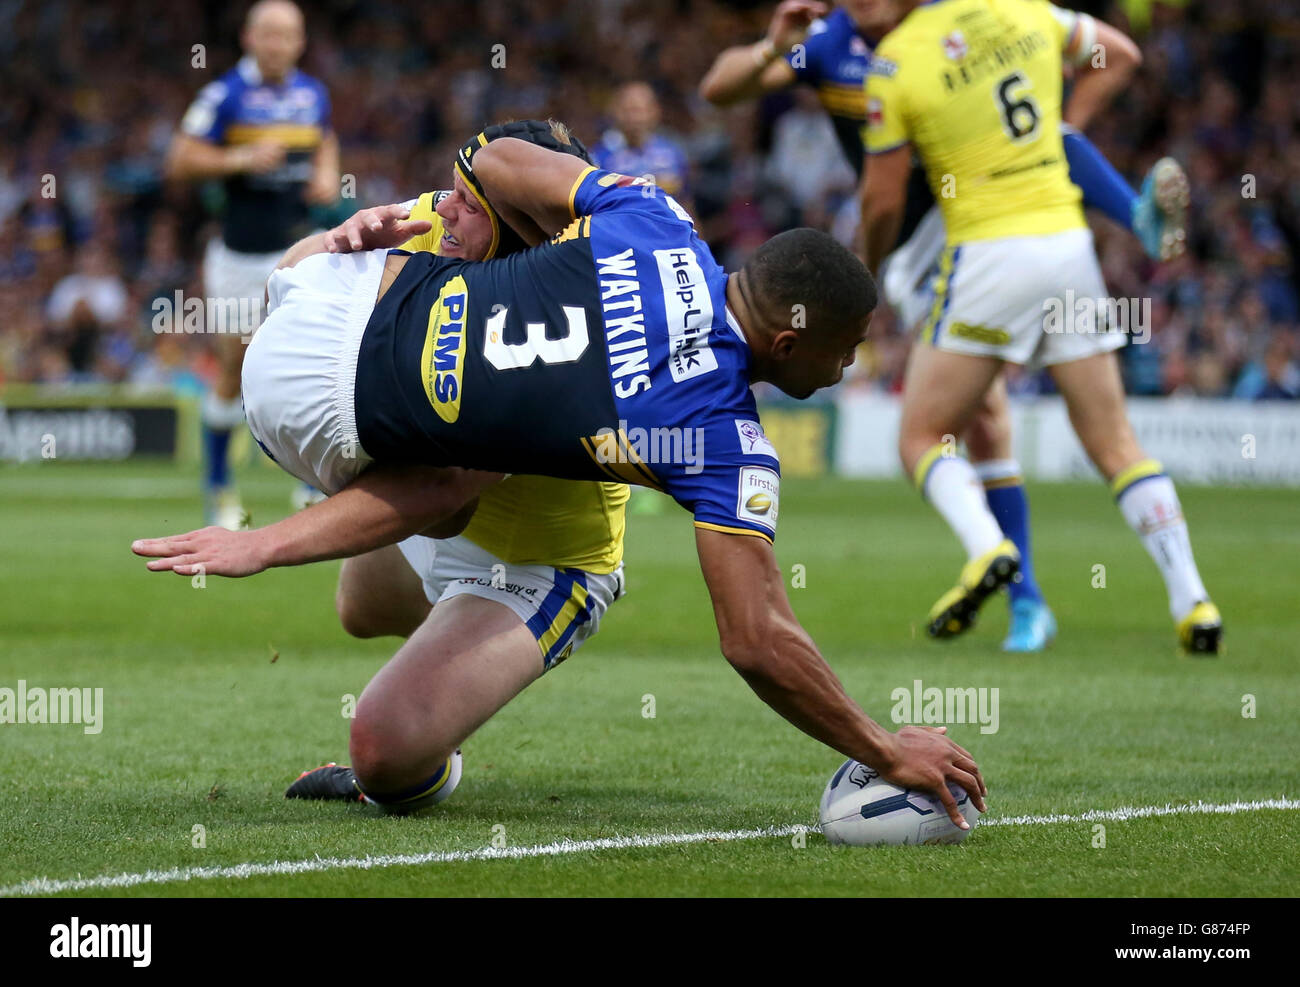 Leeds Rhino's Kallum Watkins scores his side's first try of the game during the First Utility Super League, Super 8s match at Headingley Carnegie, Leeds. Stock Photo